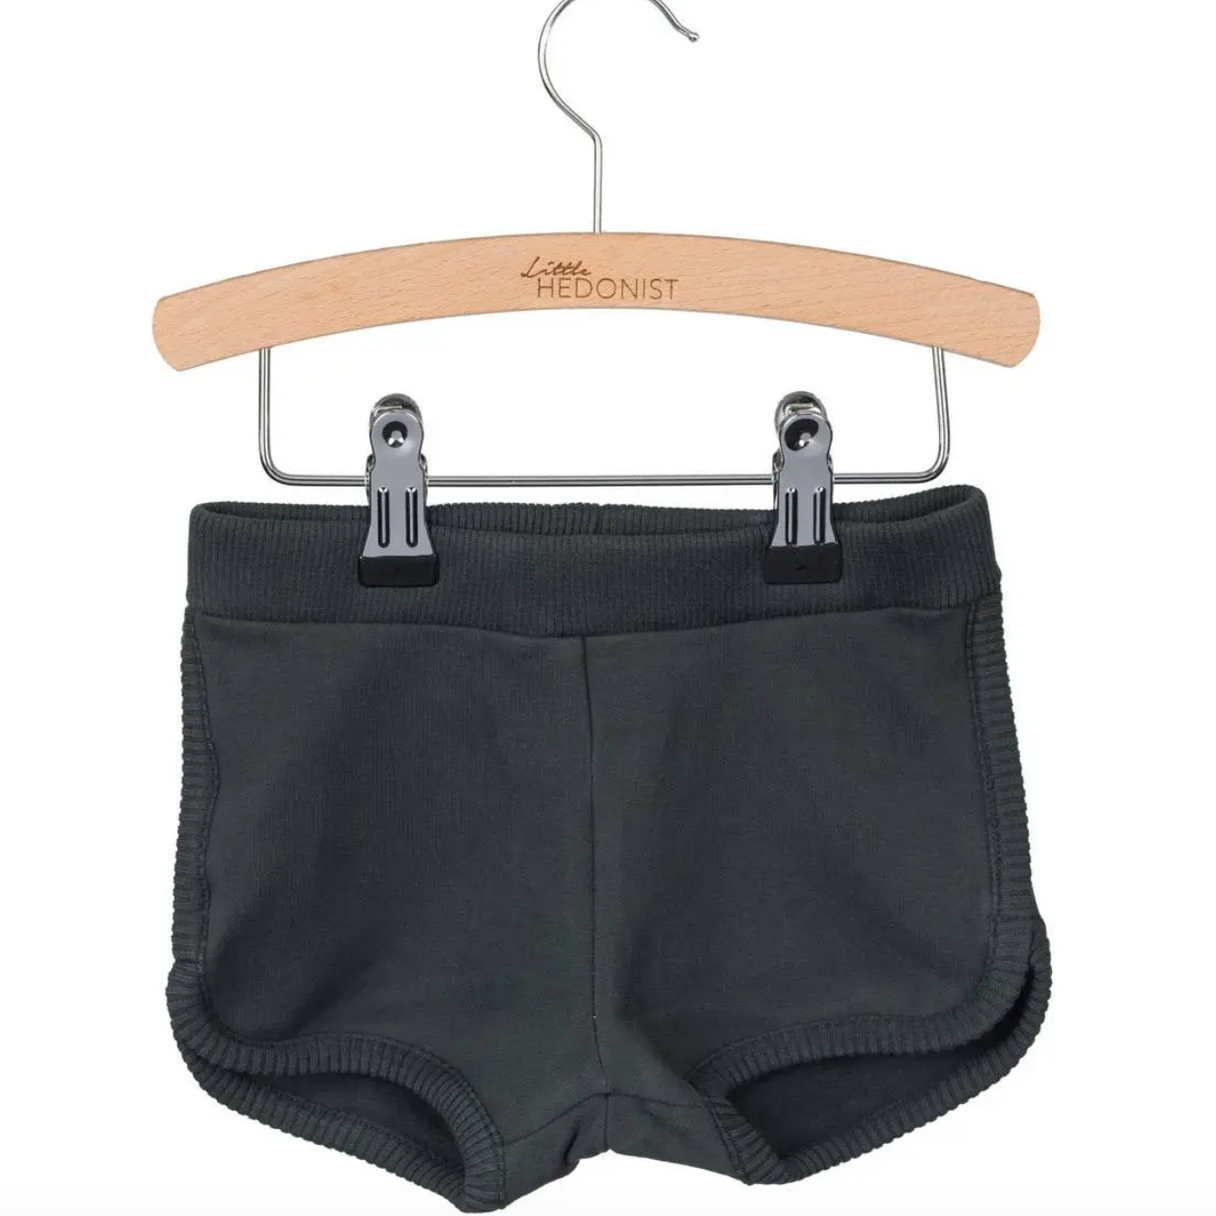 These Little Hedonist shorts are made from the softest organic babysweat you can imagine. This comfy sweatshorts has got a tight fit and a waistband with a thick rubber band.